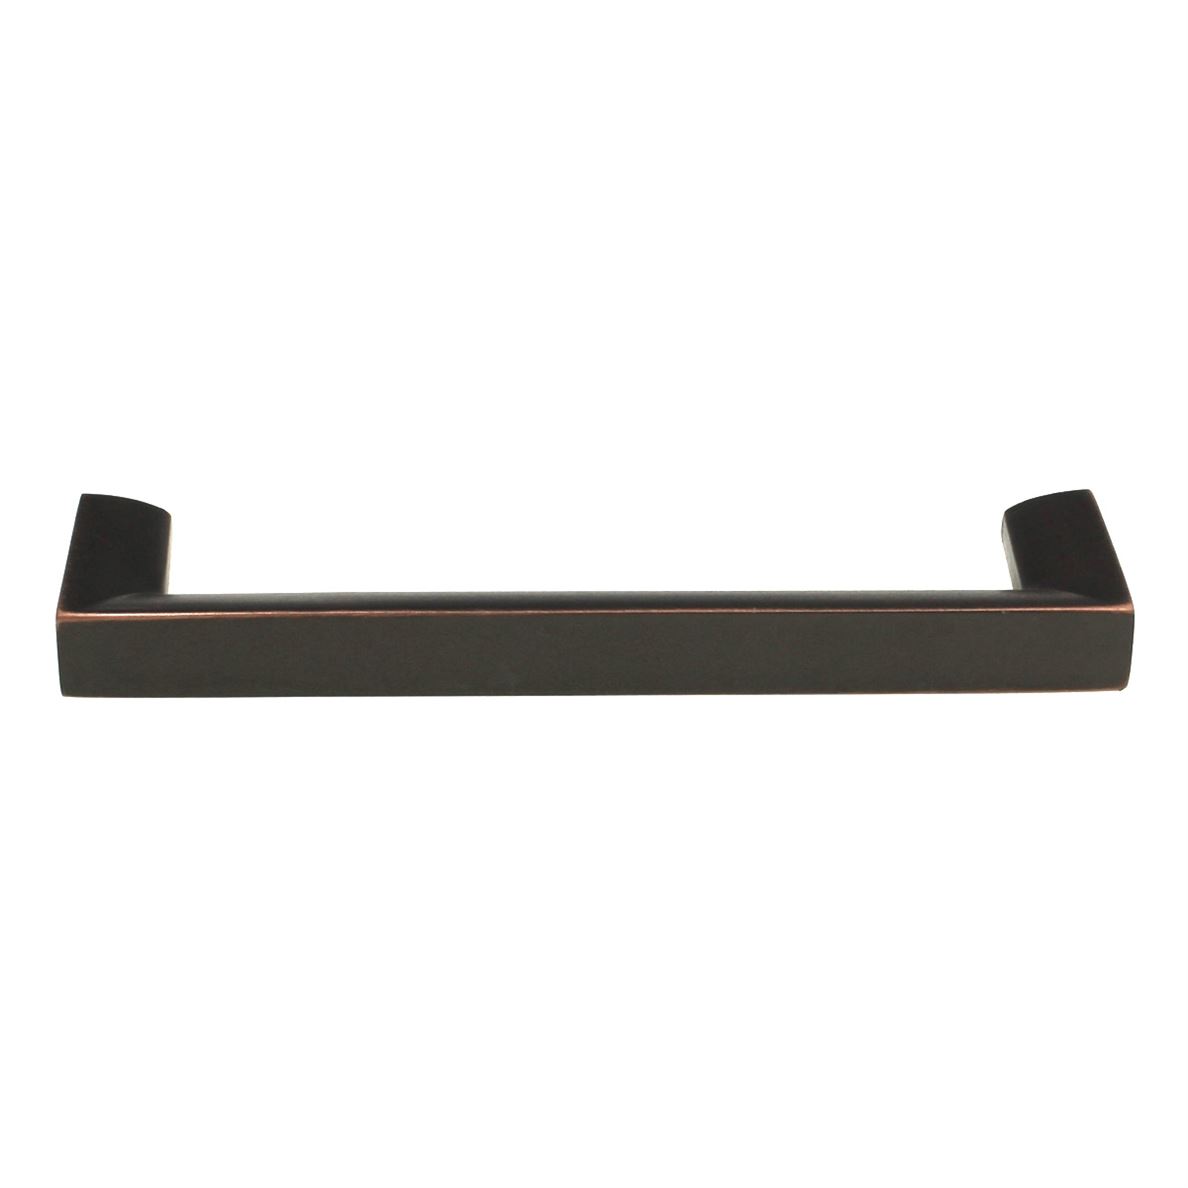 Hickory Hardware Rochester Oil-Rubbed Bronze 3 3/4" (96mm) Ctr. Pull P3112-OBH